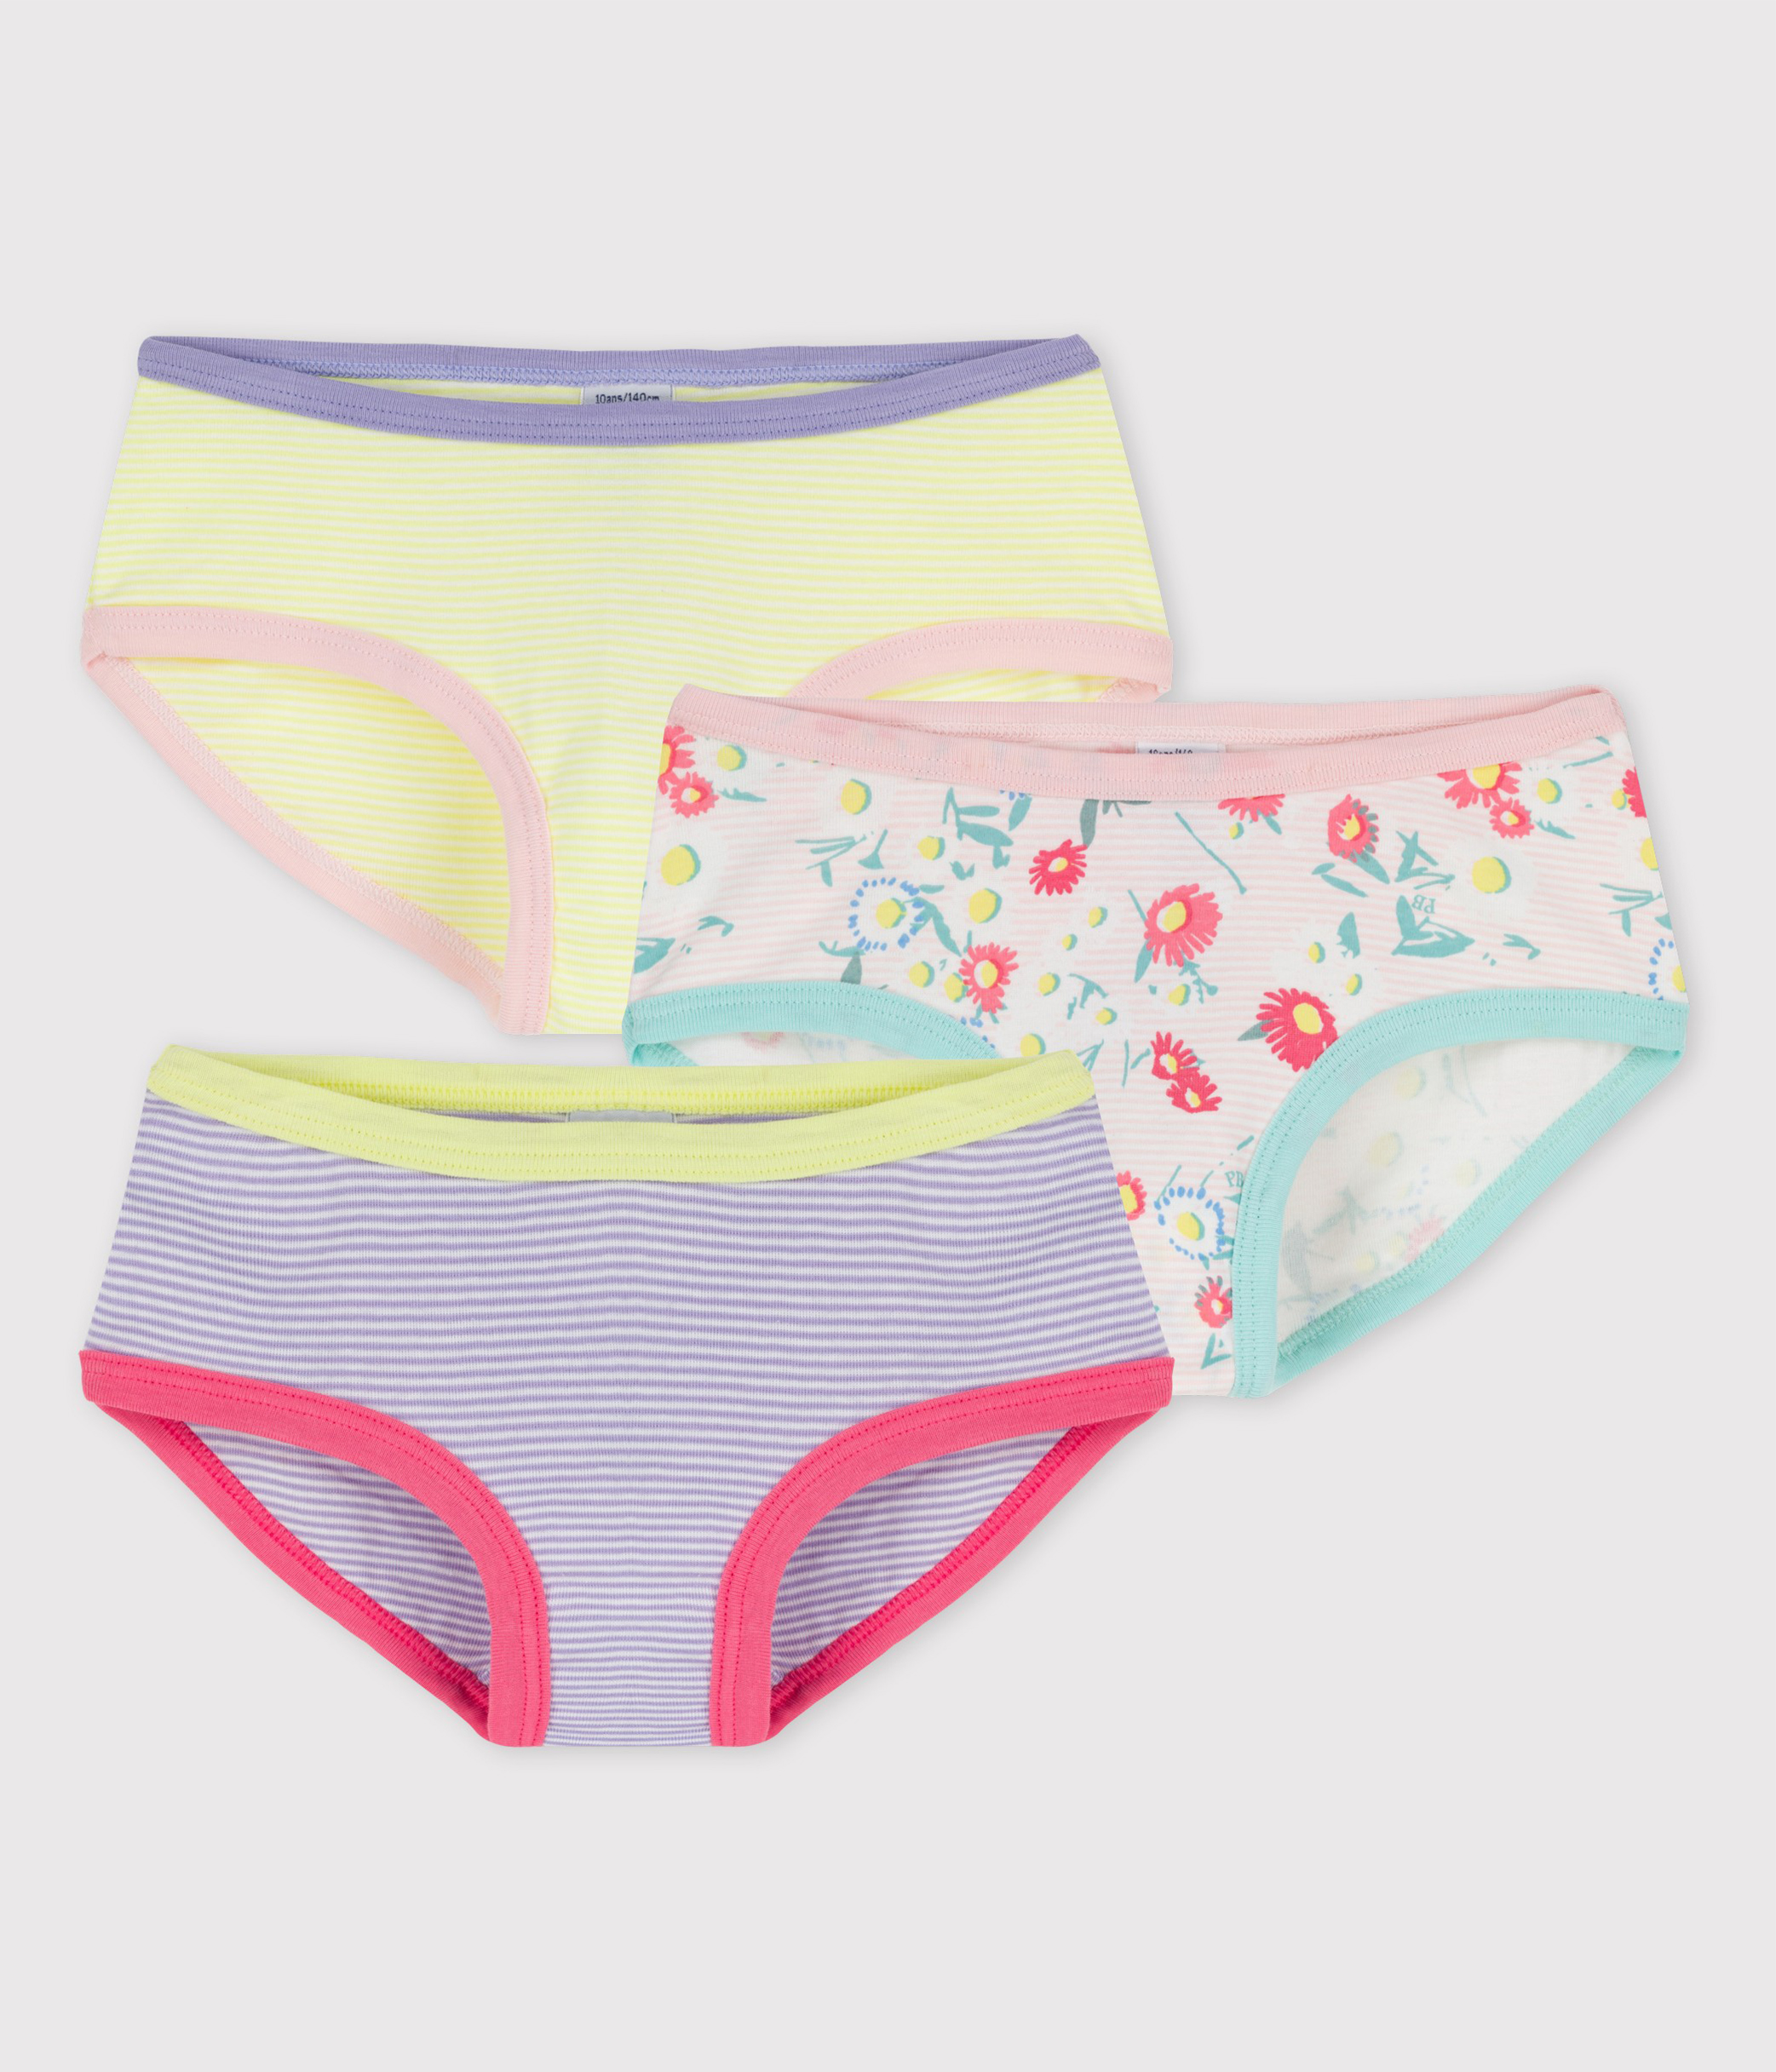 Petit Bateau Girls' Knickers 3-Piece Set Knickers for 12 Years 